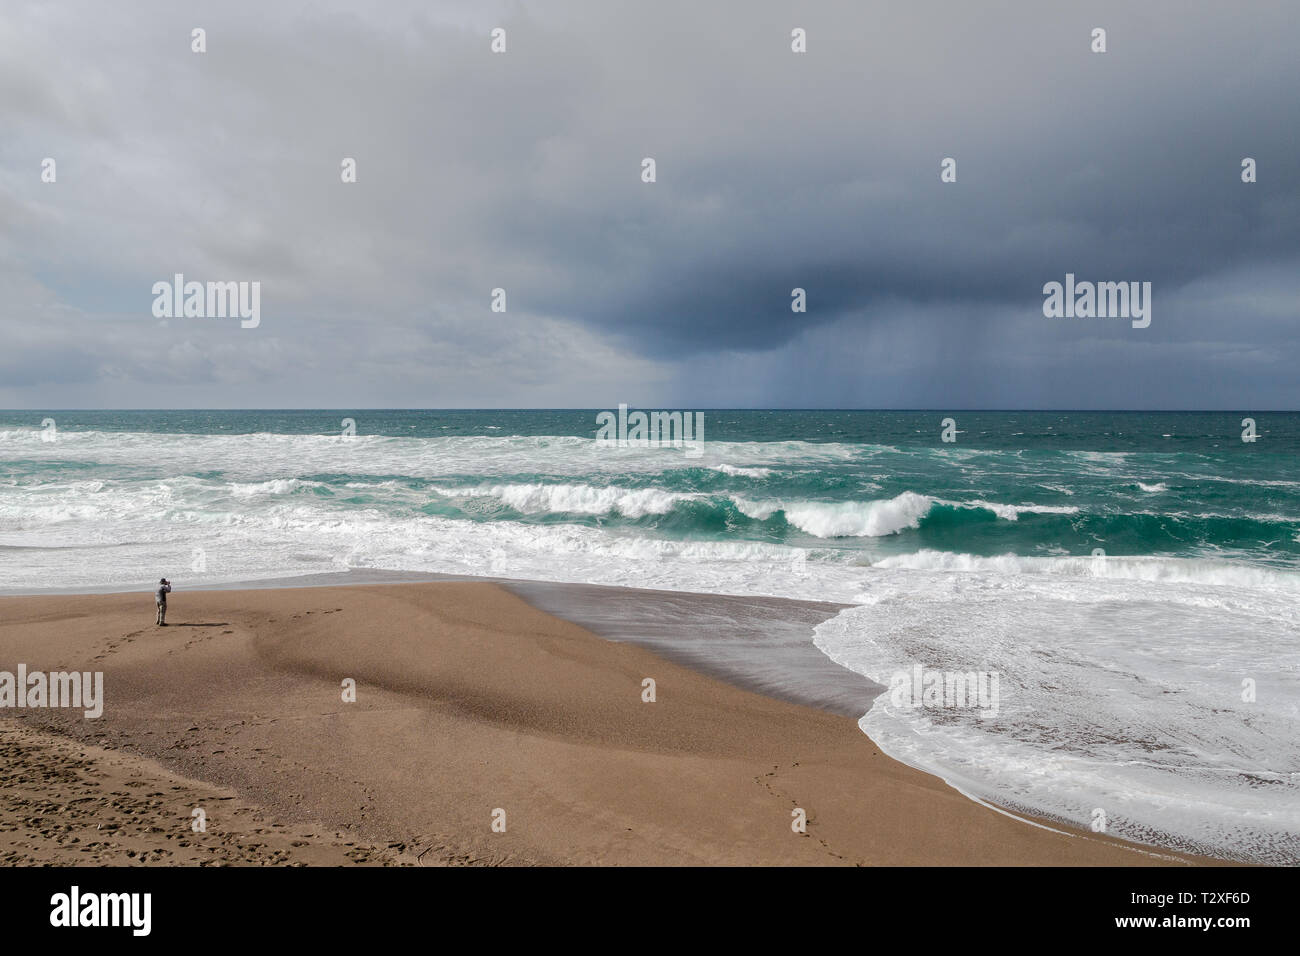 A photographer looks small compared to the stormy sea and dreary rain clouds on the Northern California coast. Stock Photo